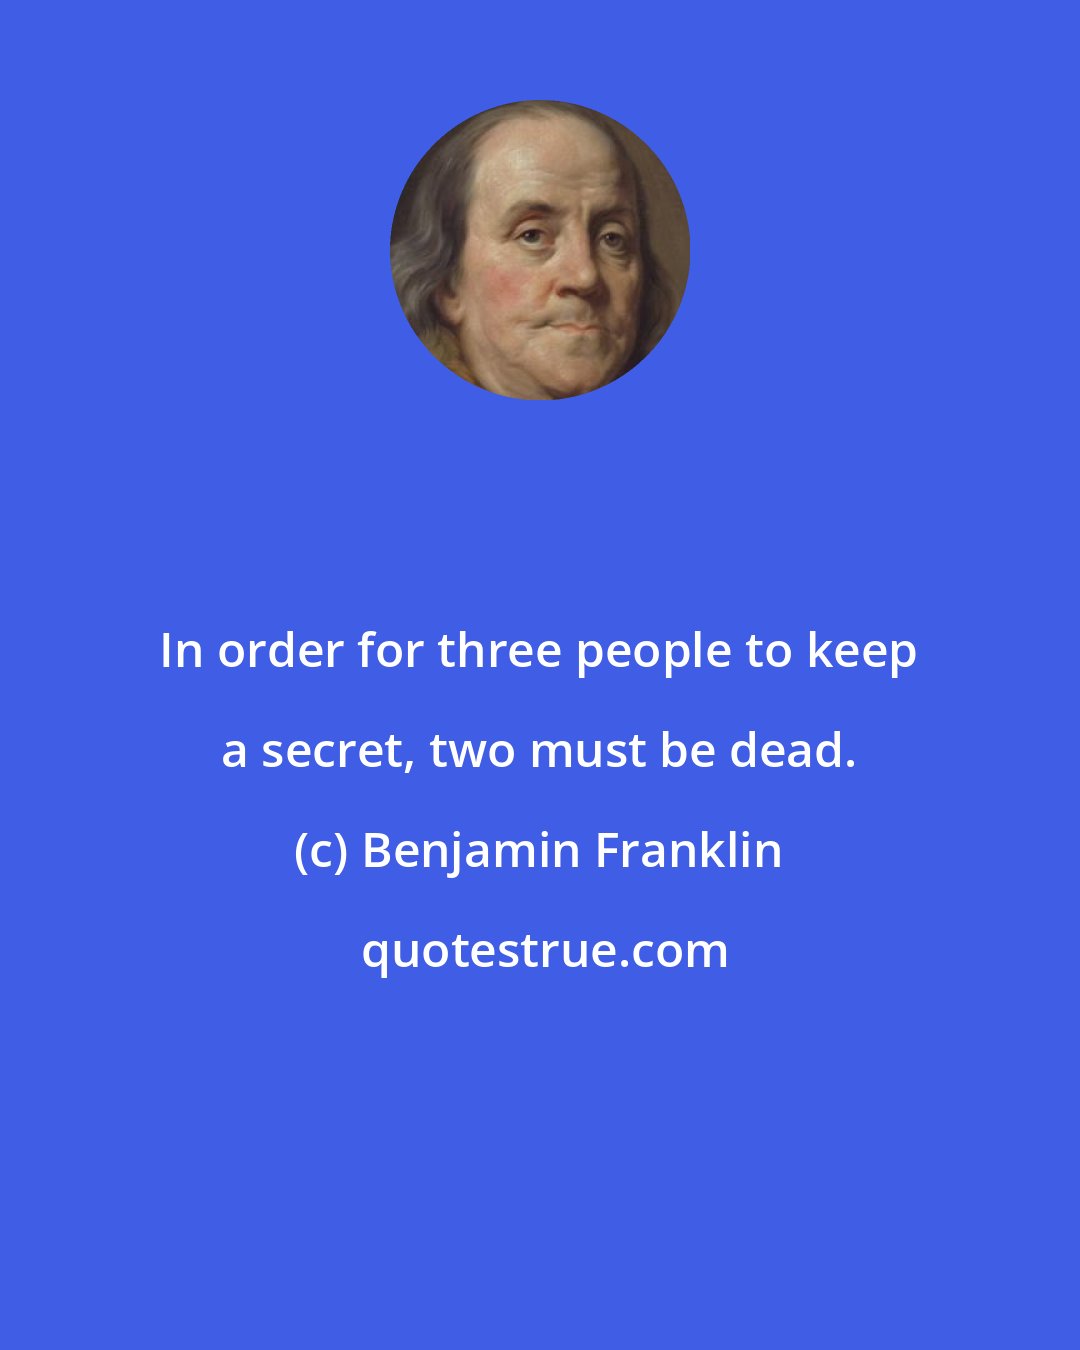 Benjamin Franklin: In order for three people to keep a secret, two must be dead.